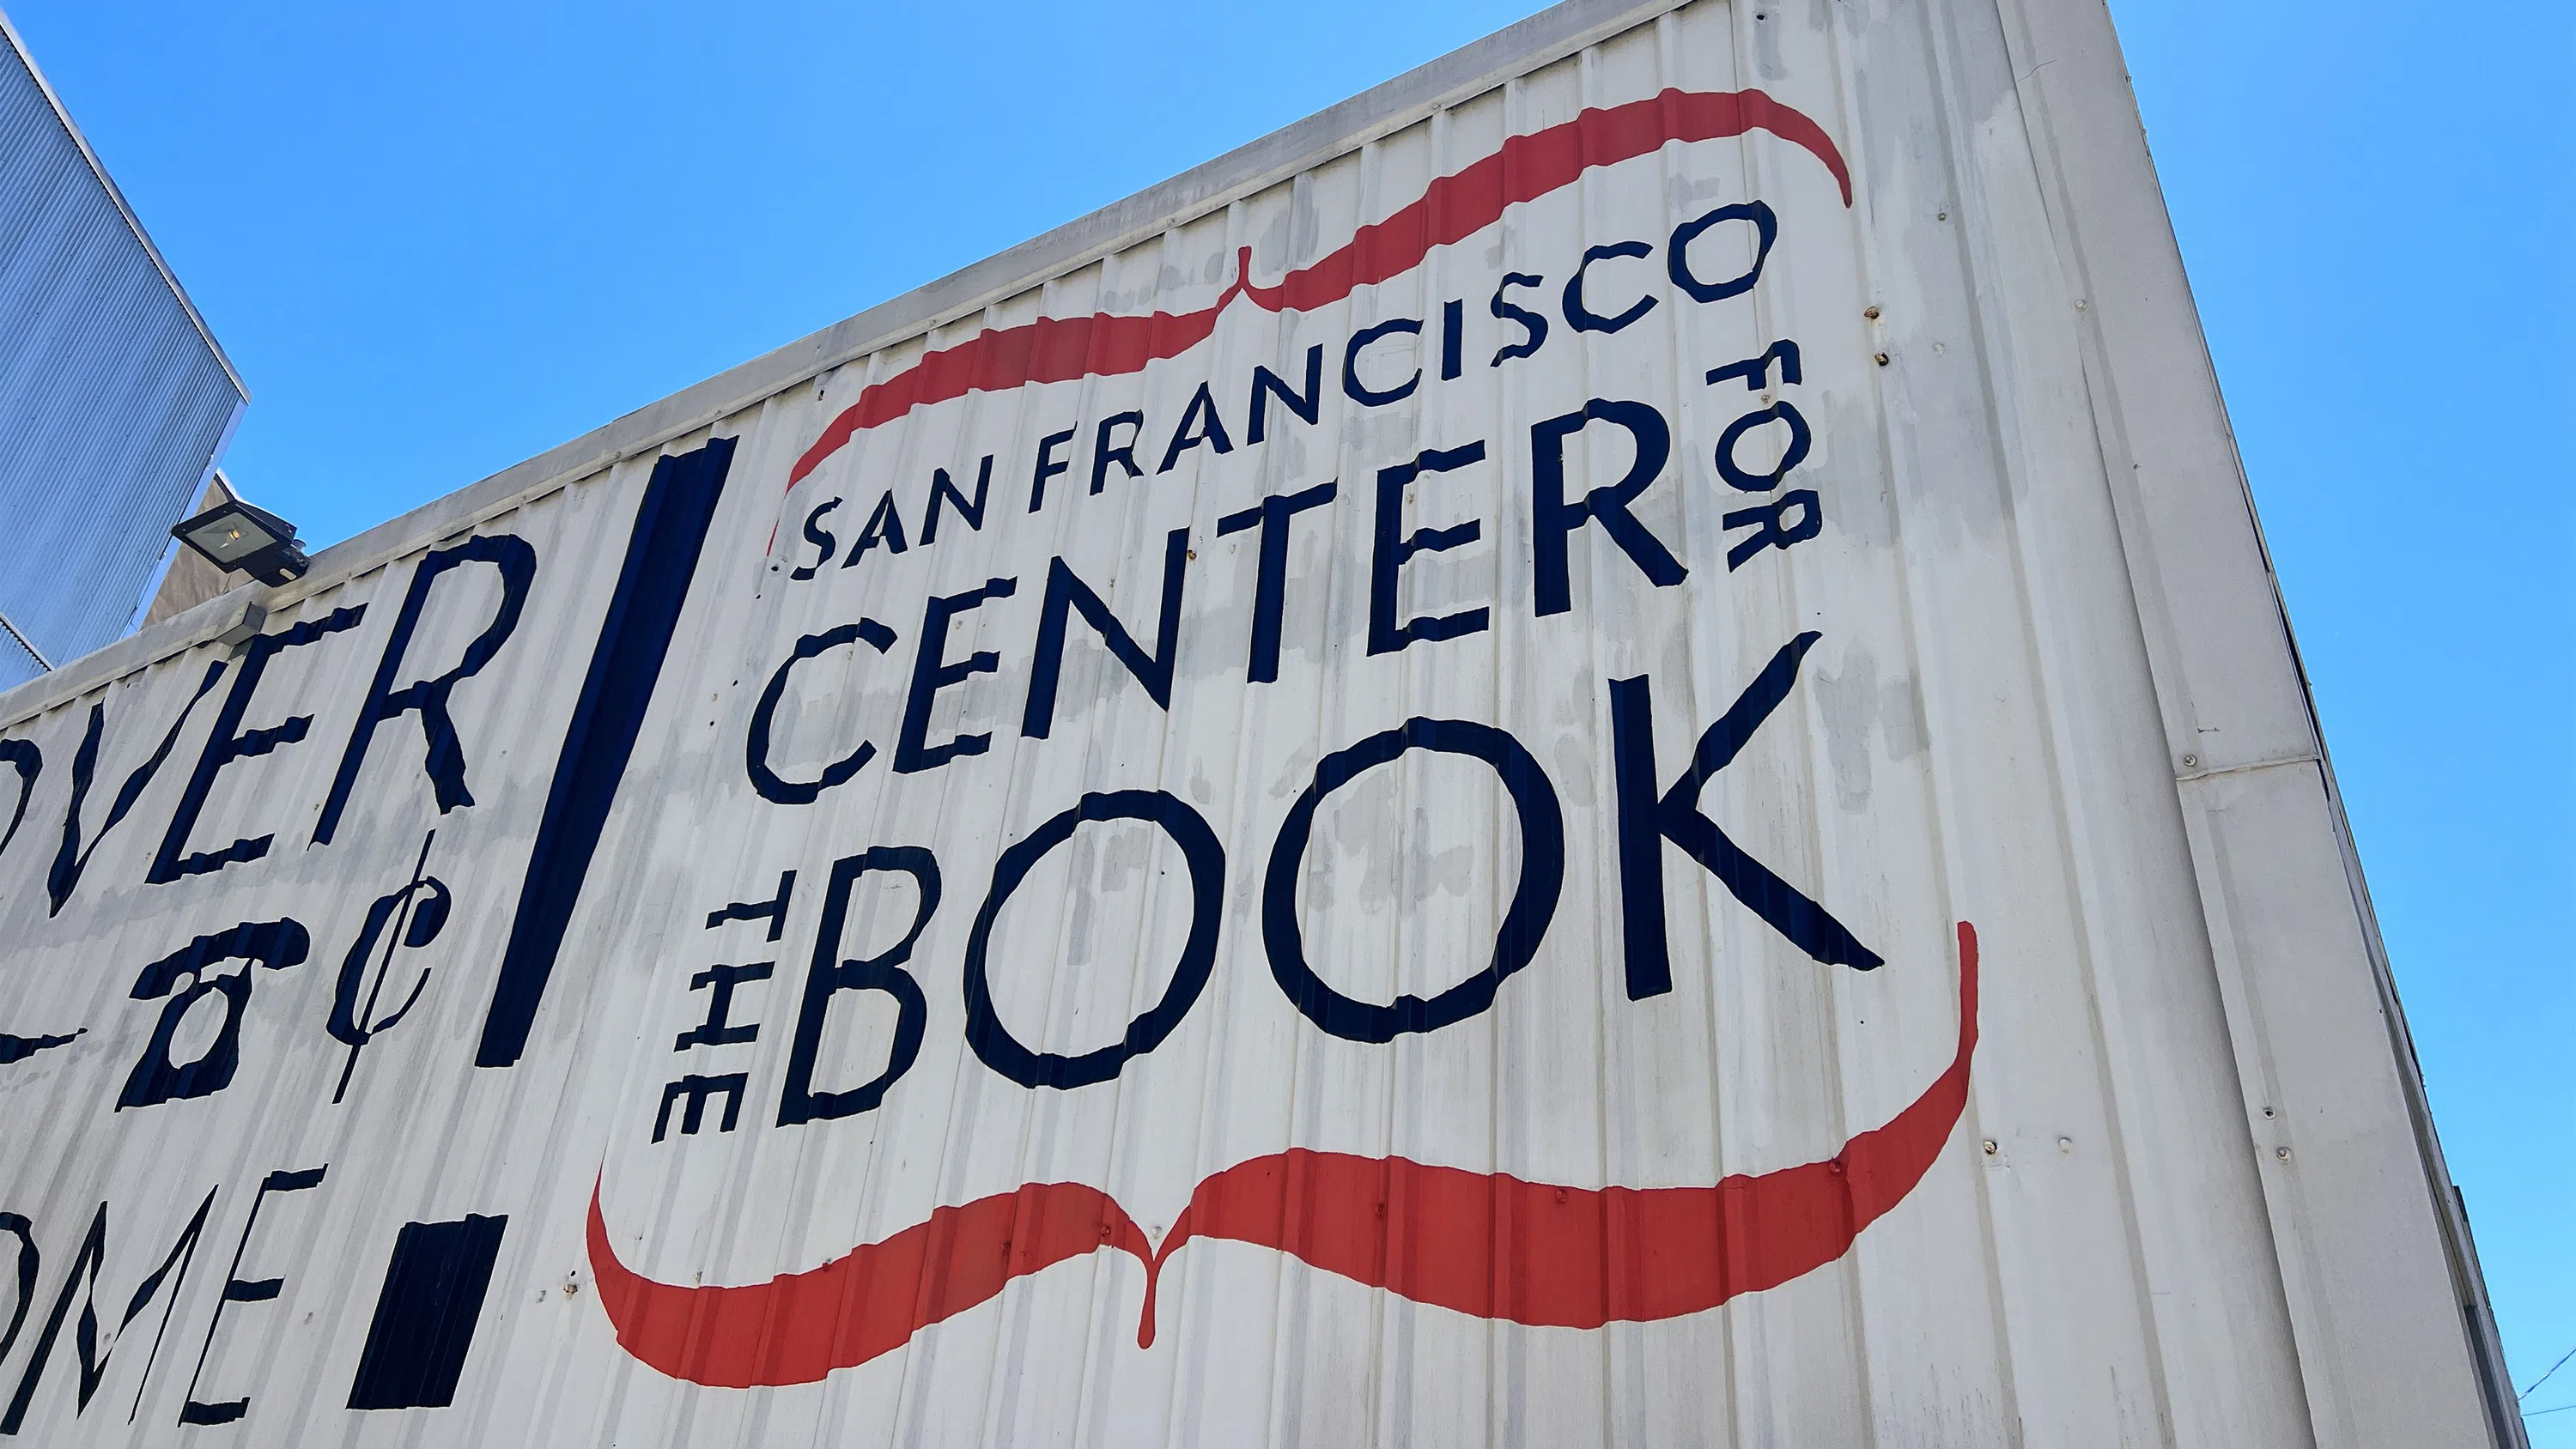 Exterior view of the SF Center for the Book.